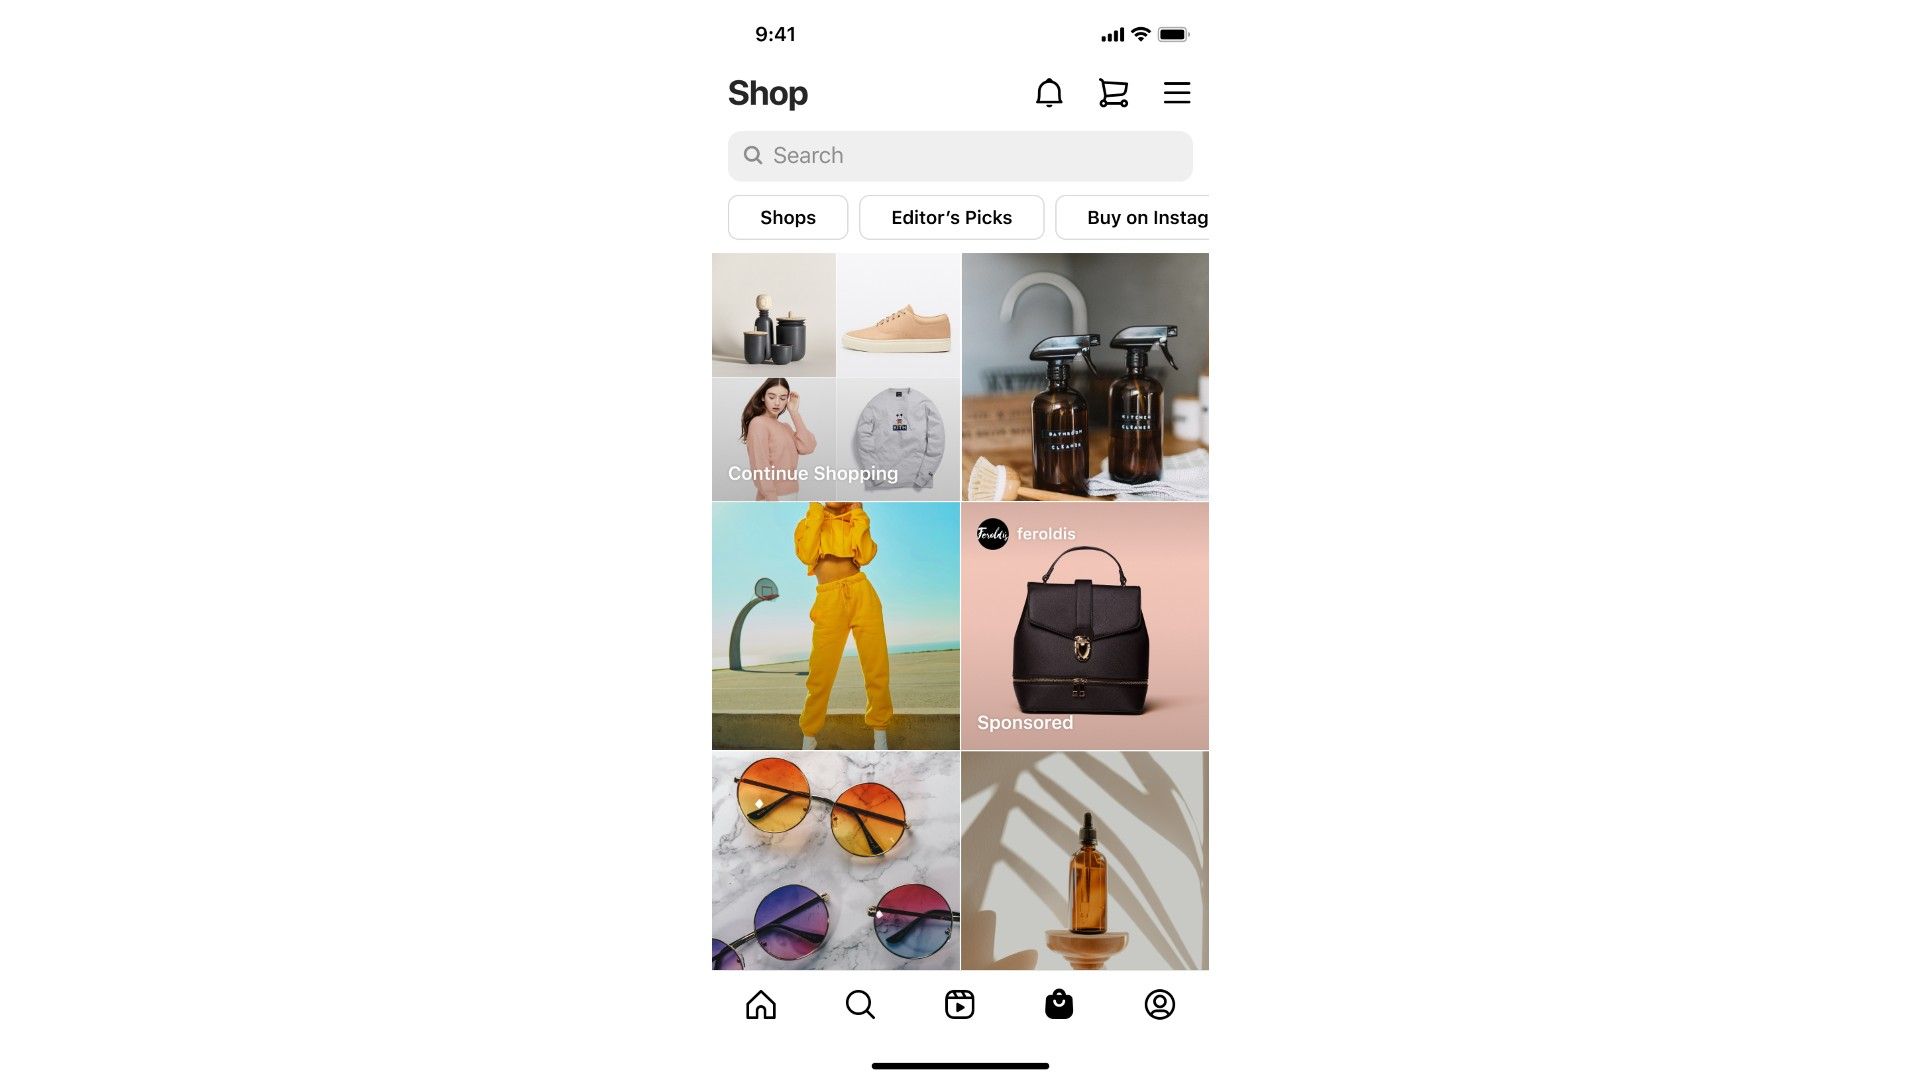 Facebook introduces Ads in the Instagram Shop Tab